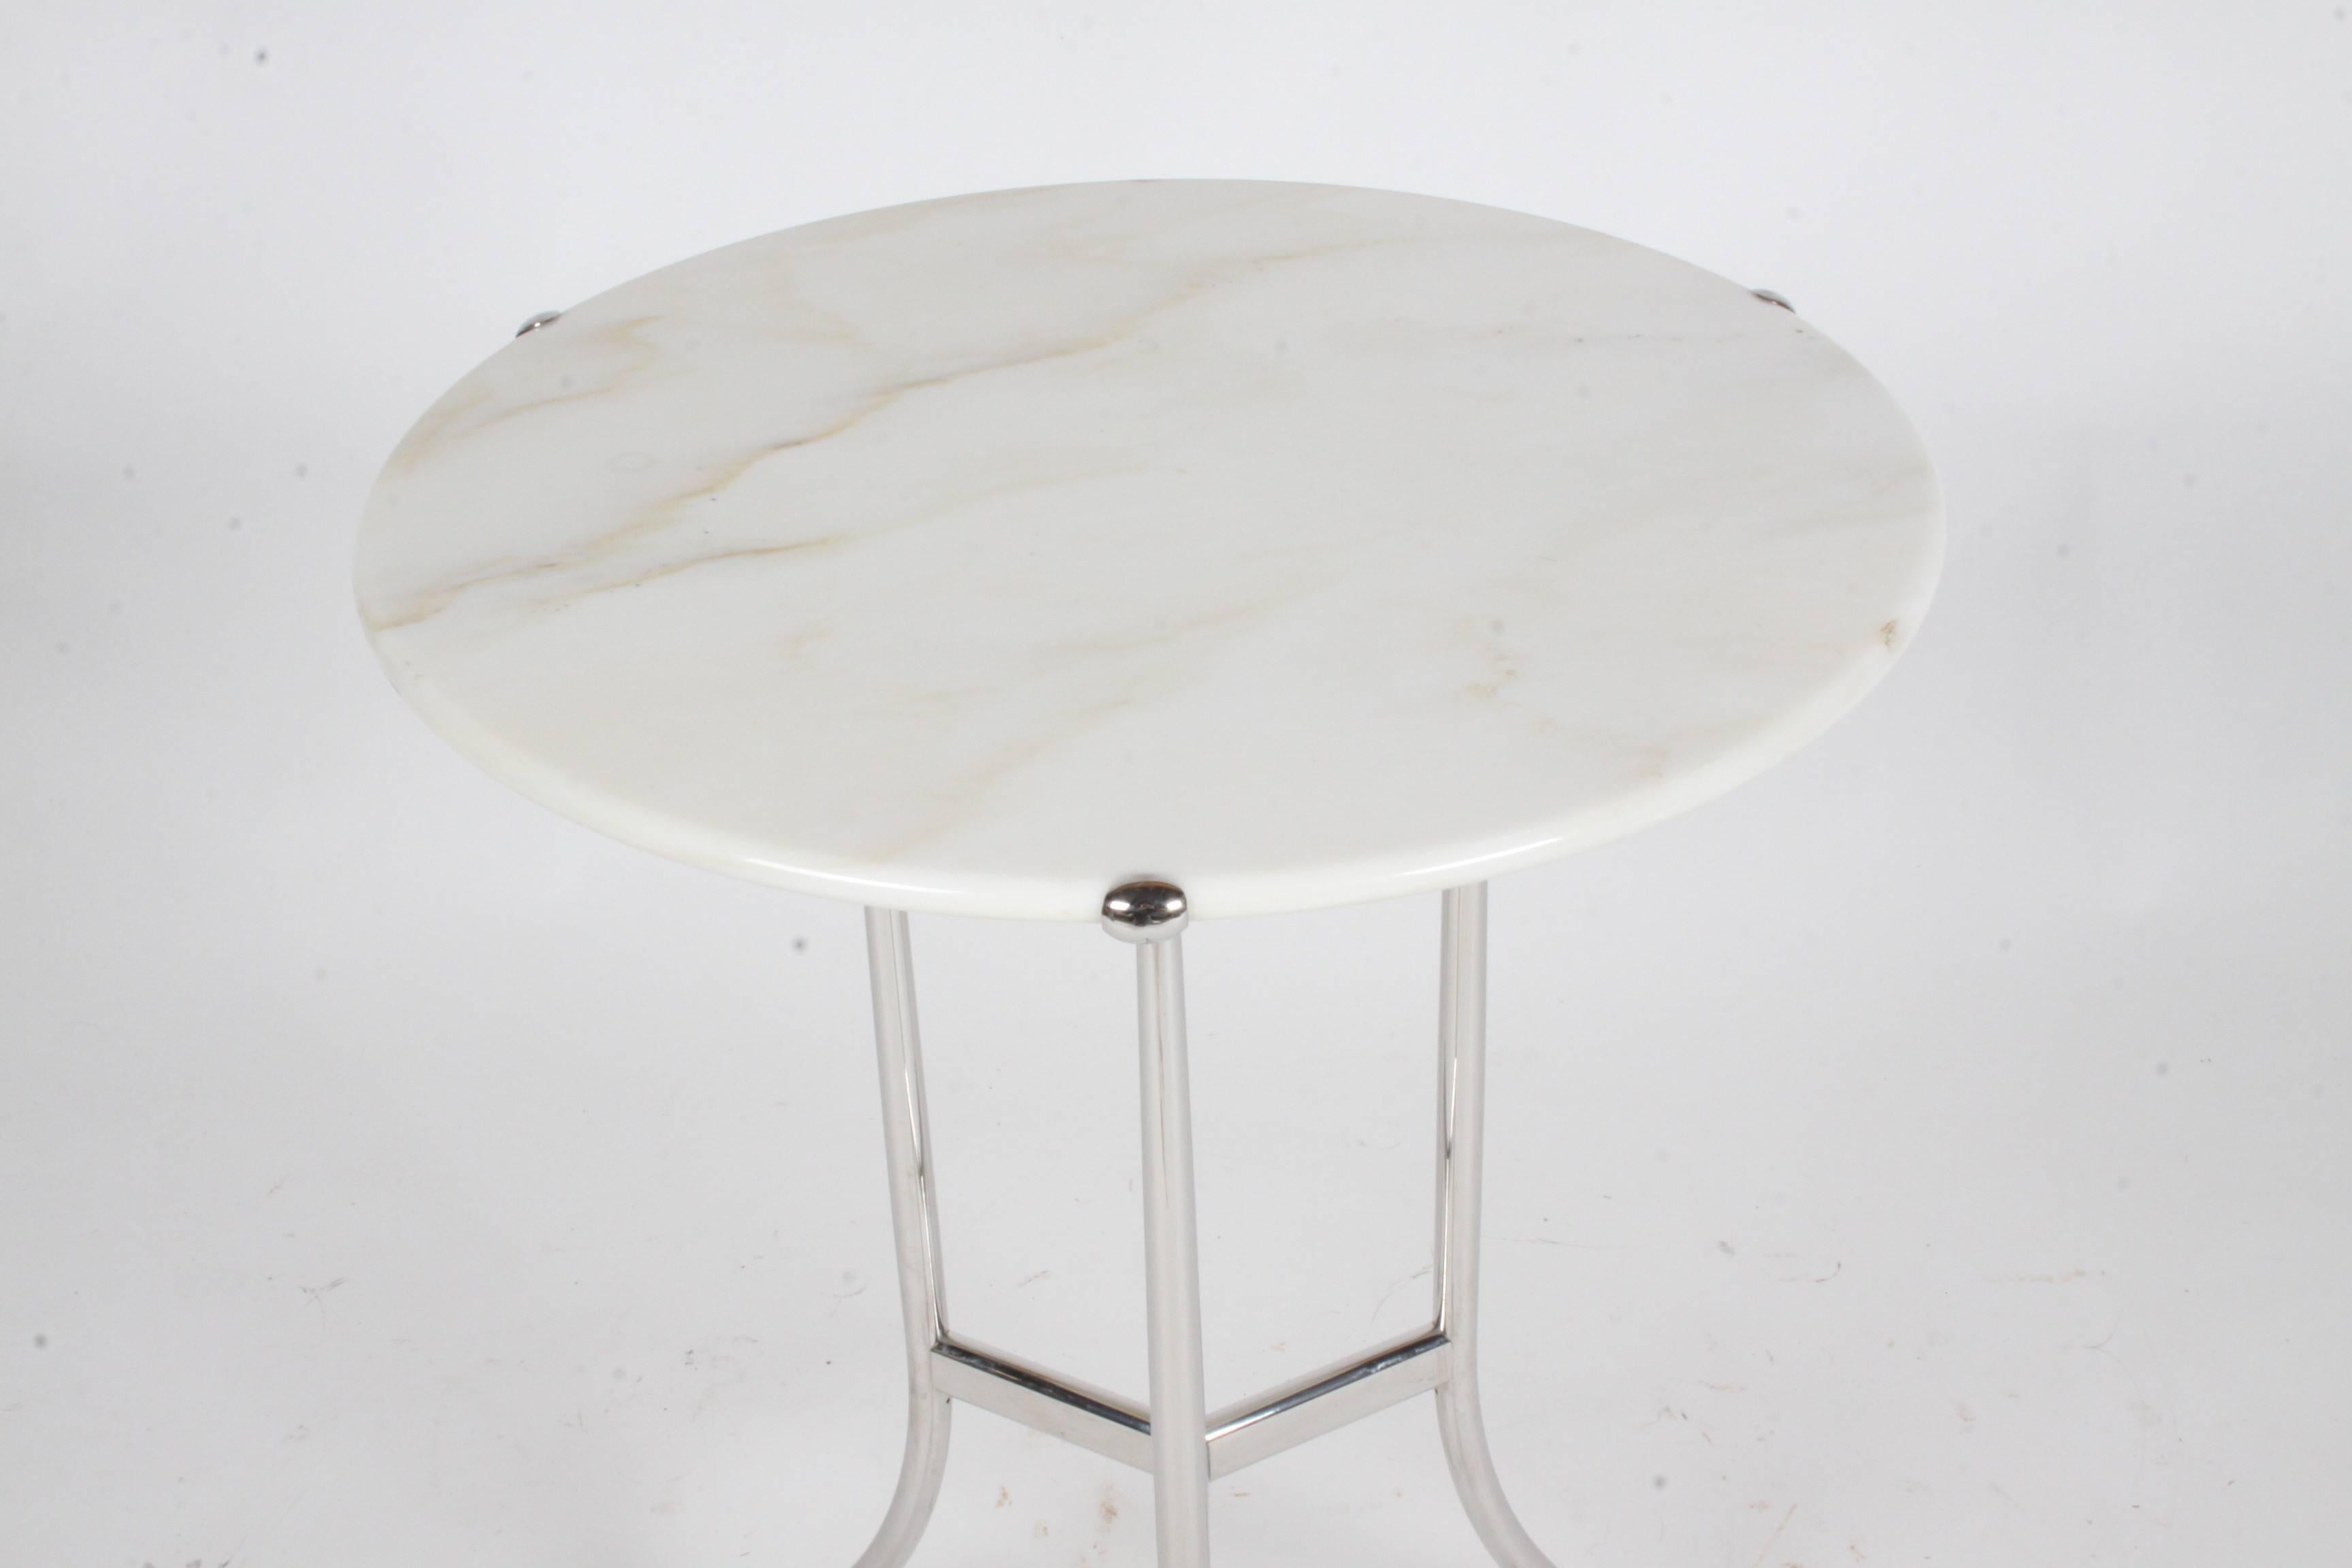 American Perfectly Designed Cedric Hartman Side Table with White Marble Top, Signed